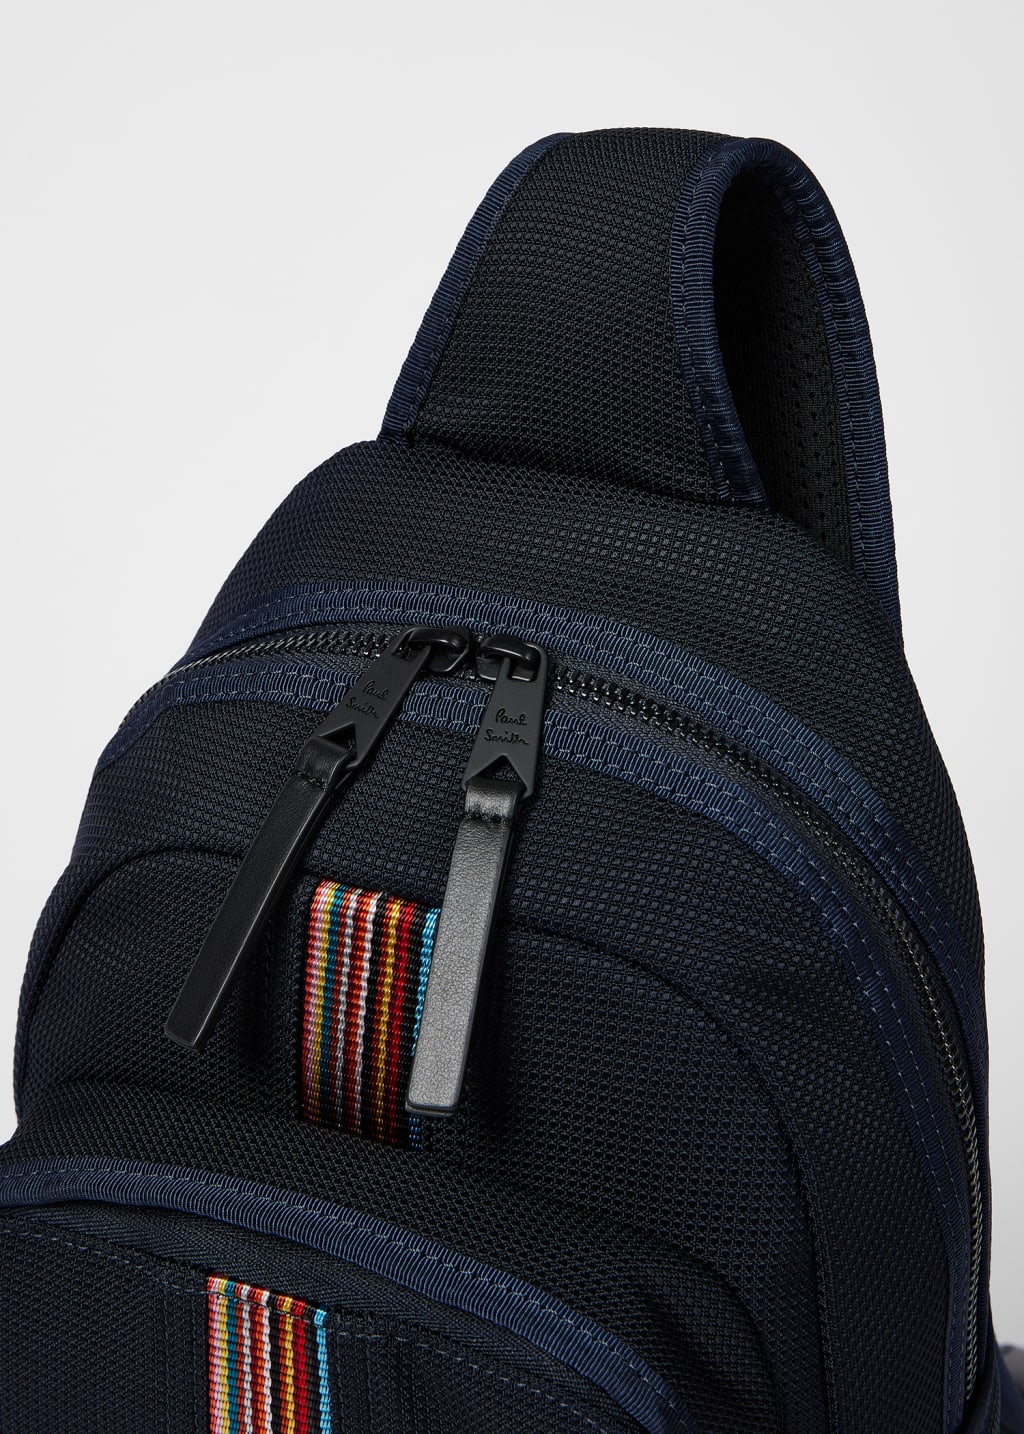 Detail View - Navy Canvas 'Signature Stipe' Sling Pack Paul Smith